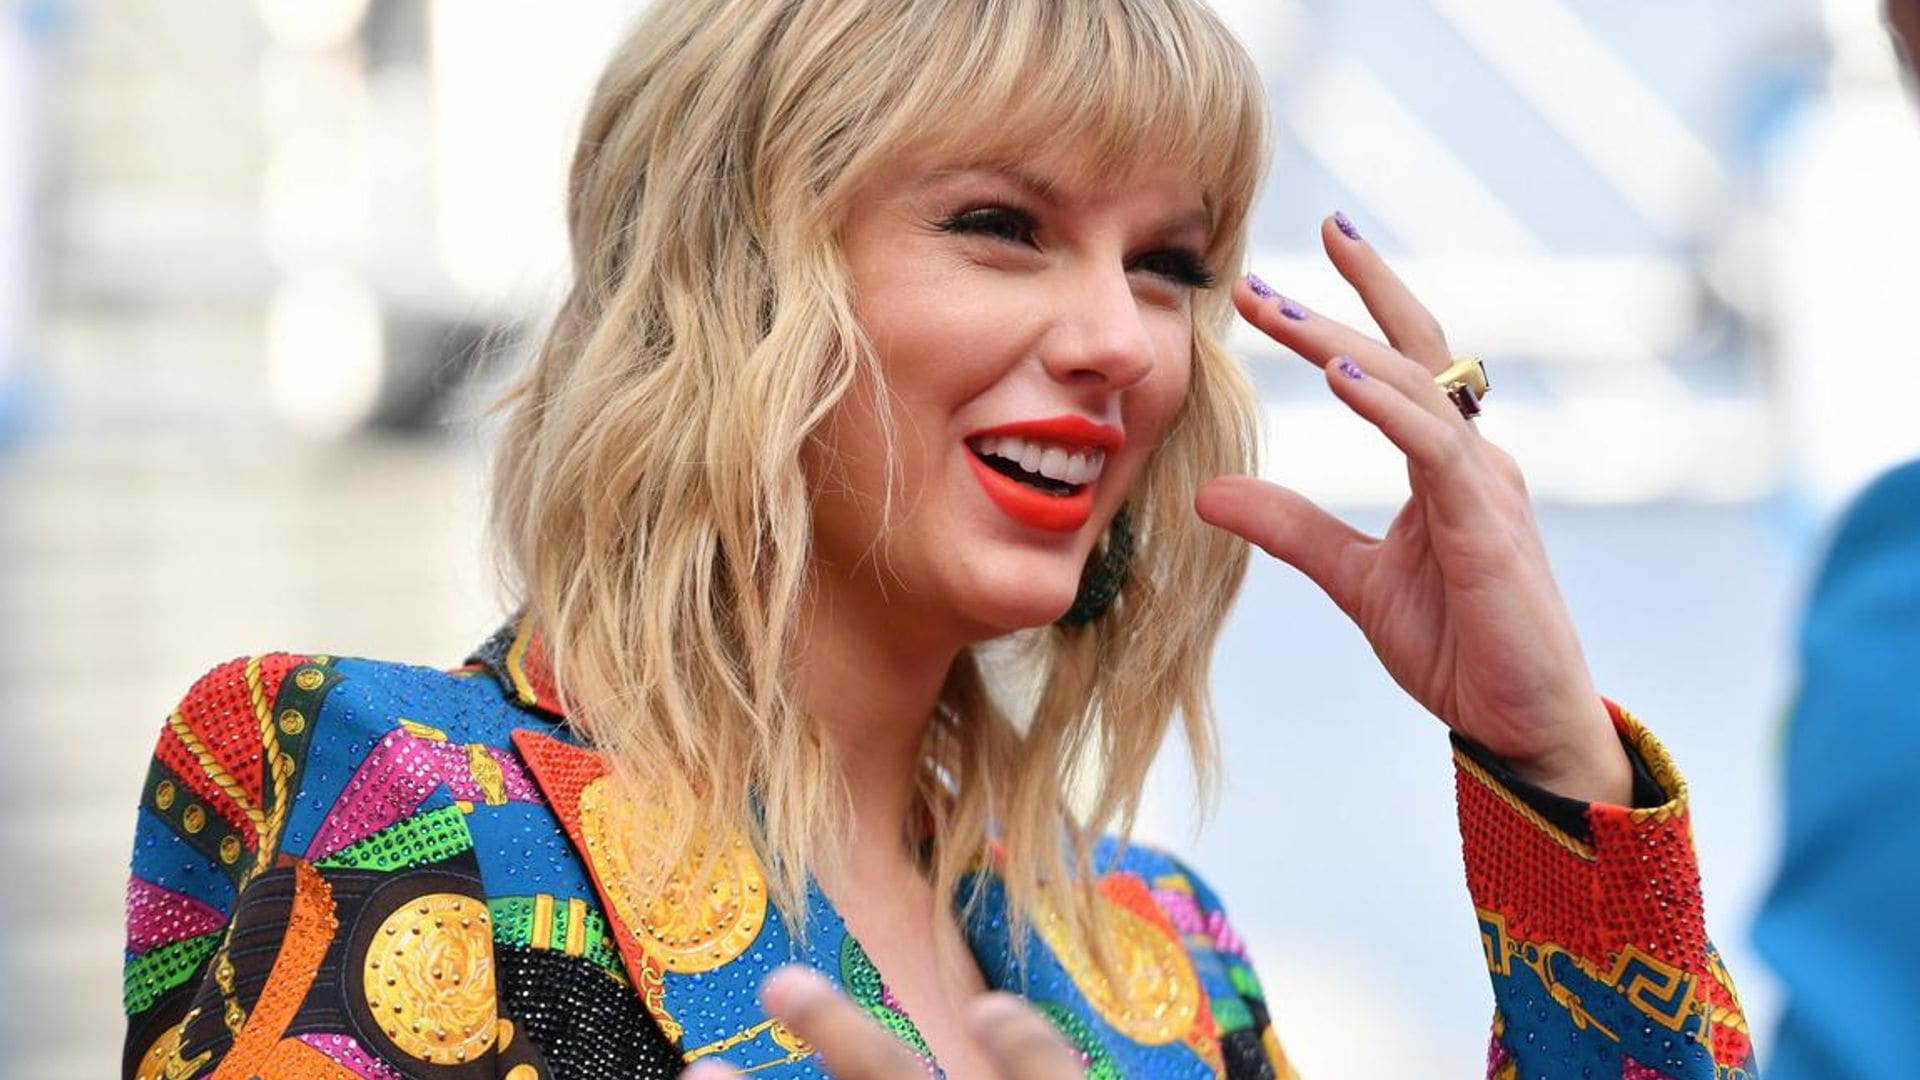 Taylor Swift hits the red carpet at the 2019 MTV Video Music Awards